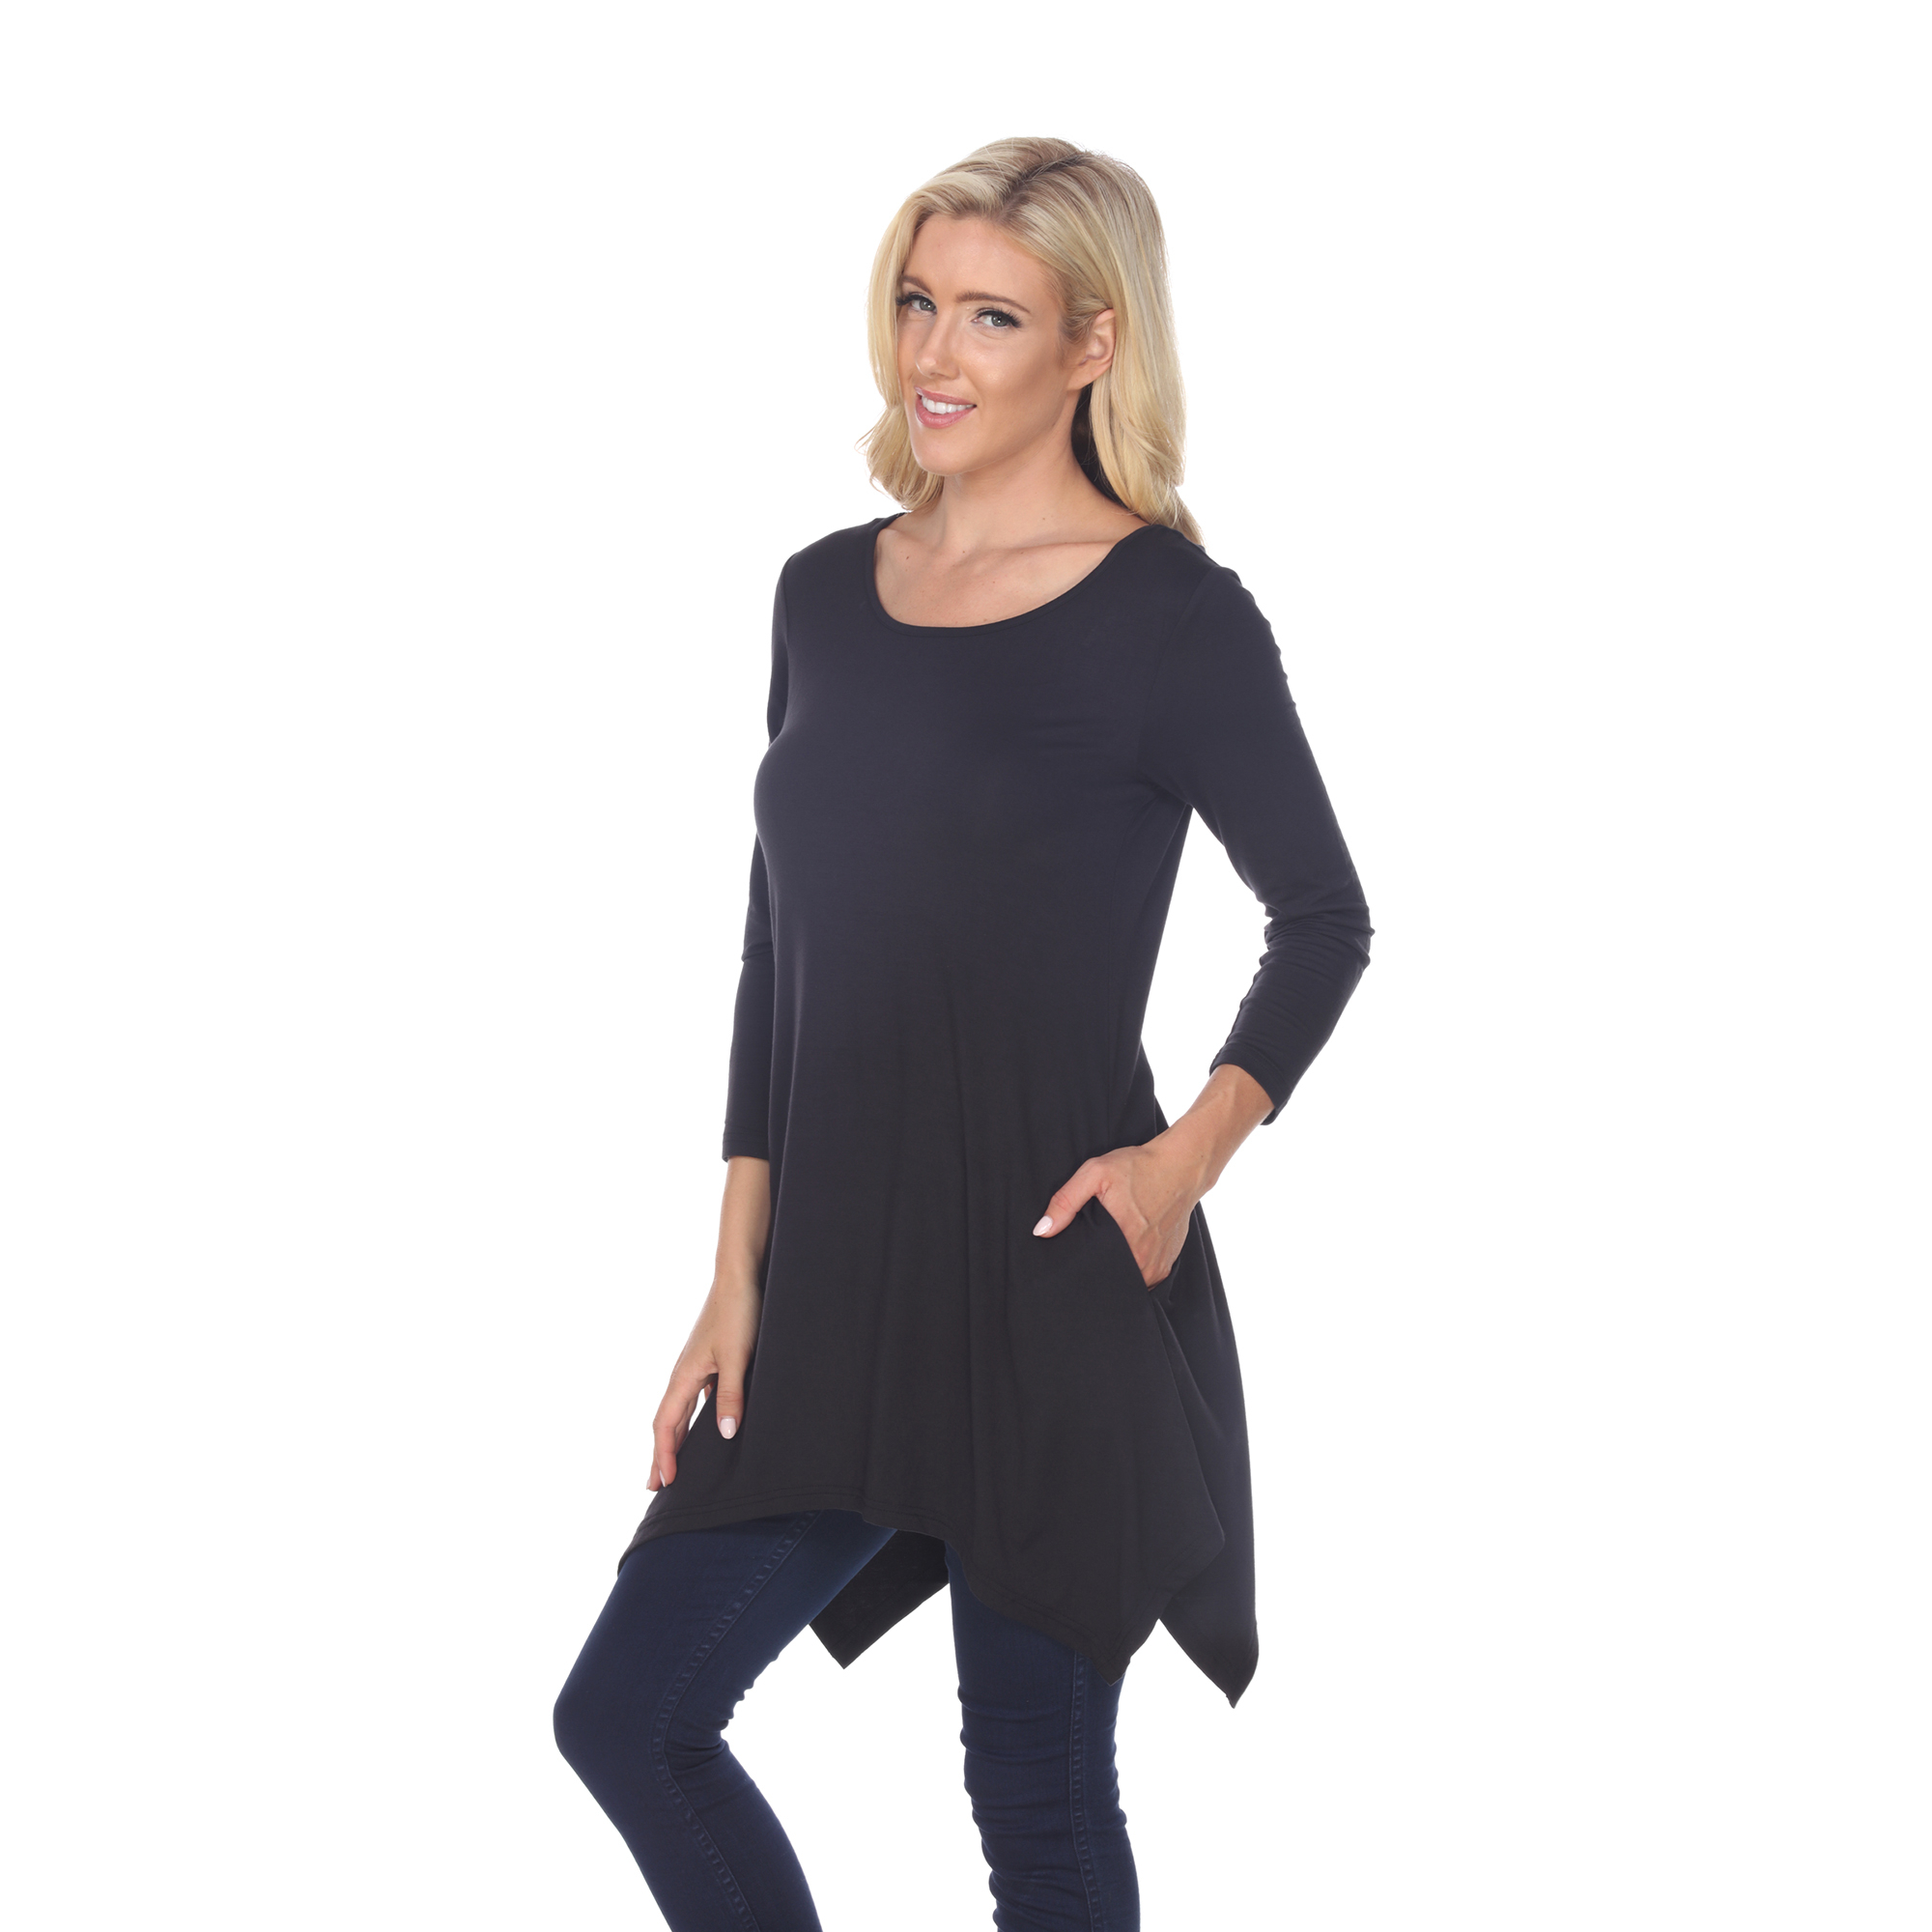 White Mark Women's Quarter Sleeve Tunic Top With Pockets - Black, Small